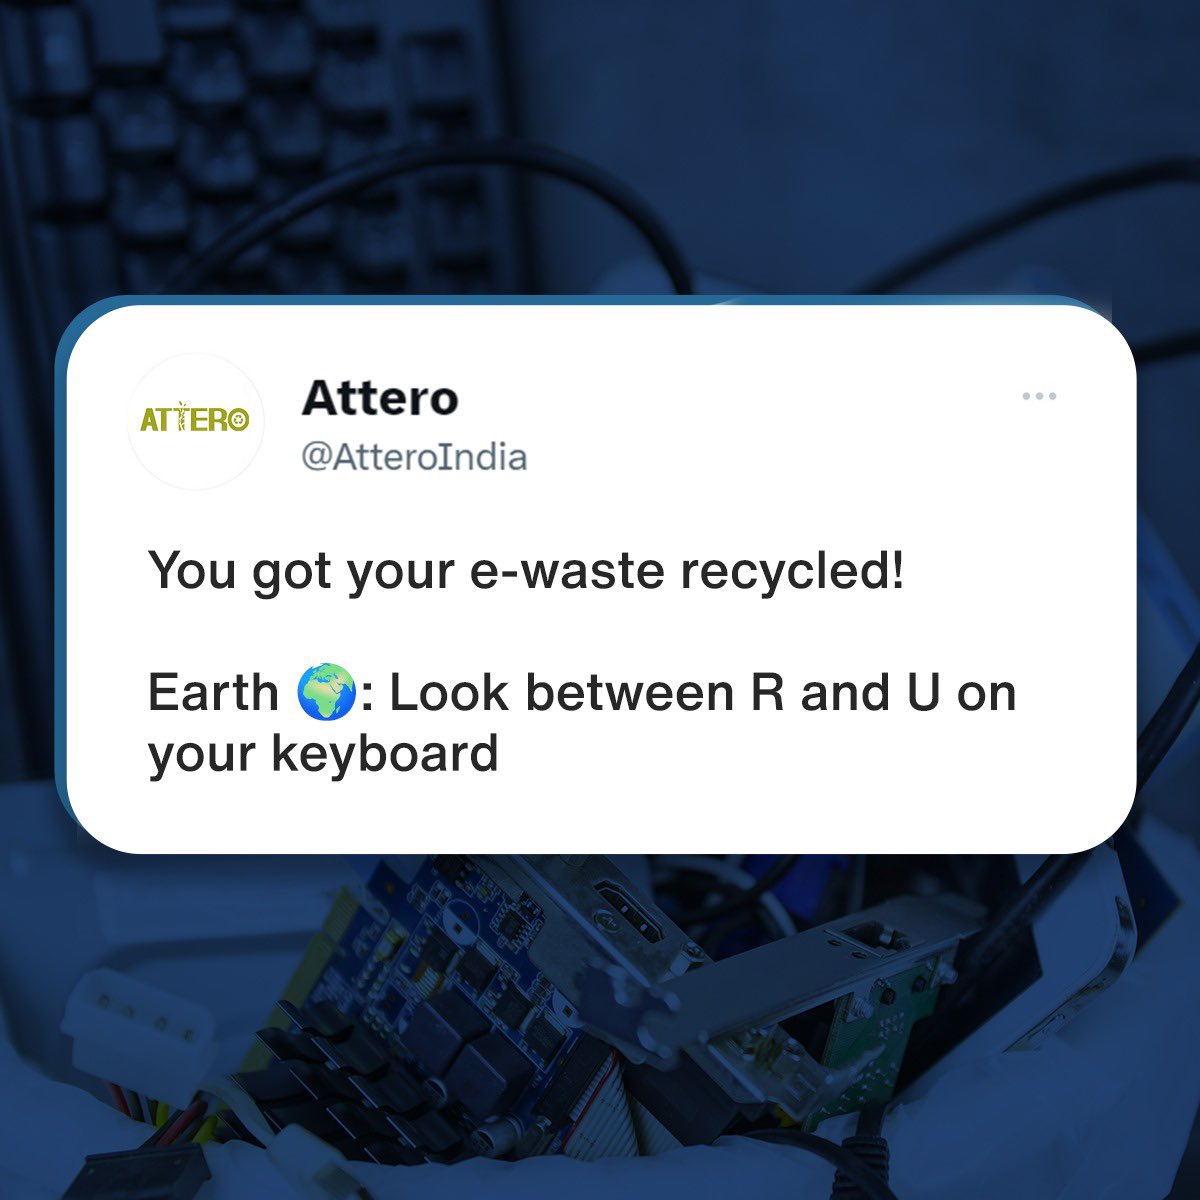 Earth has a special message for all the people who believe in  sustainability who ensure their end-of-life electronics are recycled responsibly.

#Attero #AtteroRecycling #earthday #LithiumBatteries #EWaste #SustainableFuture #RecyclingTechnology